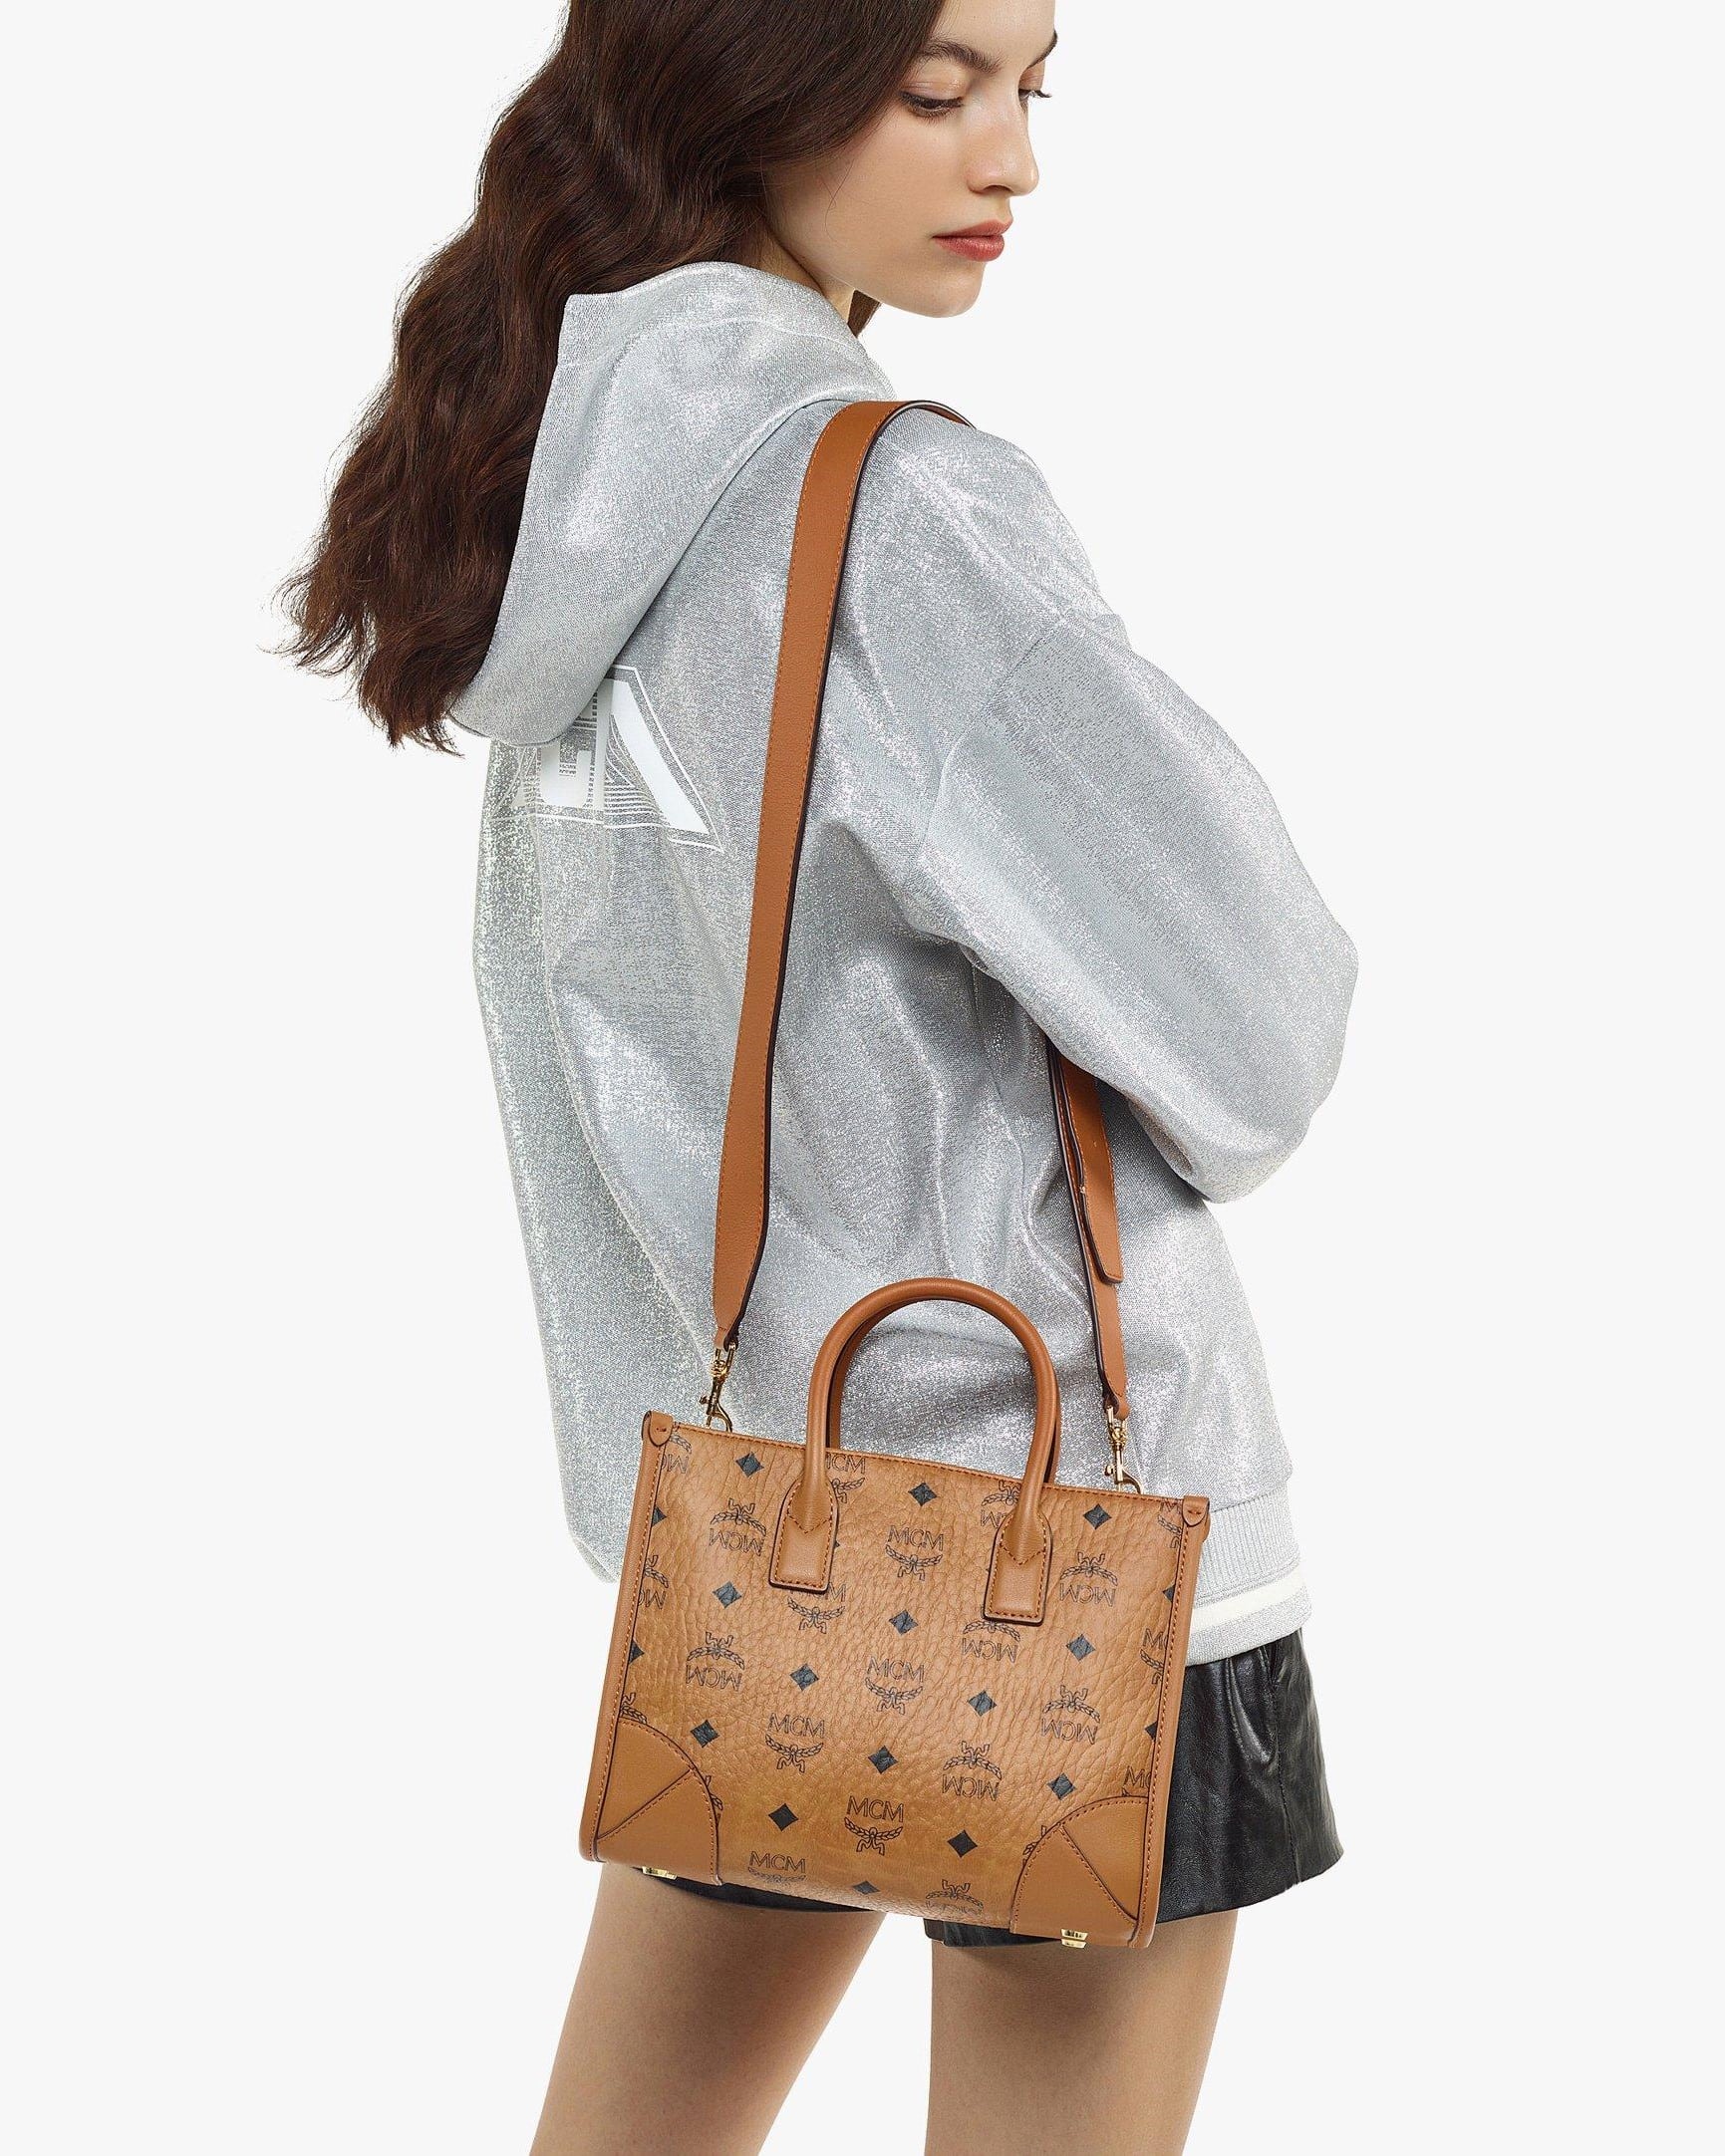 TÚI ĐEO CHÉO NỮ MCM SMALL MUNCHEN TOTE BAG IN VISETOS AND NAPPA LEATHER 3